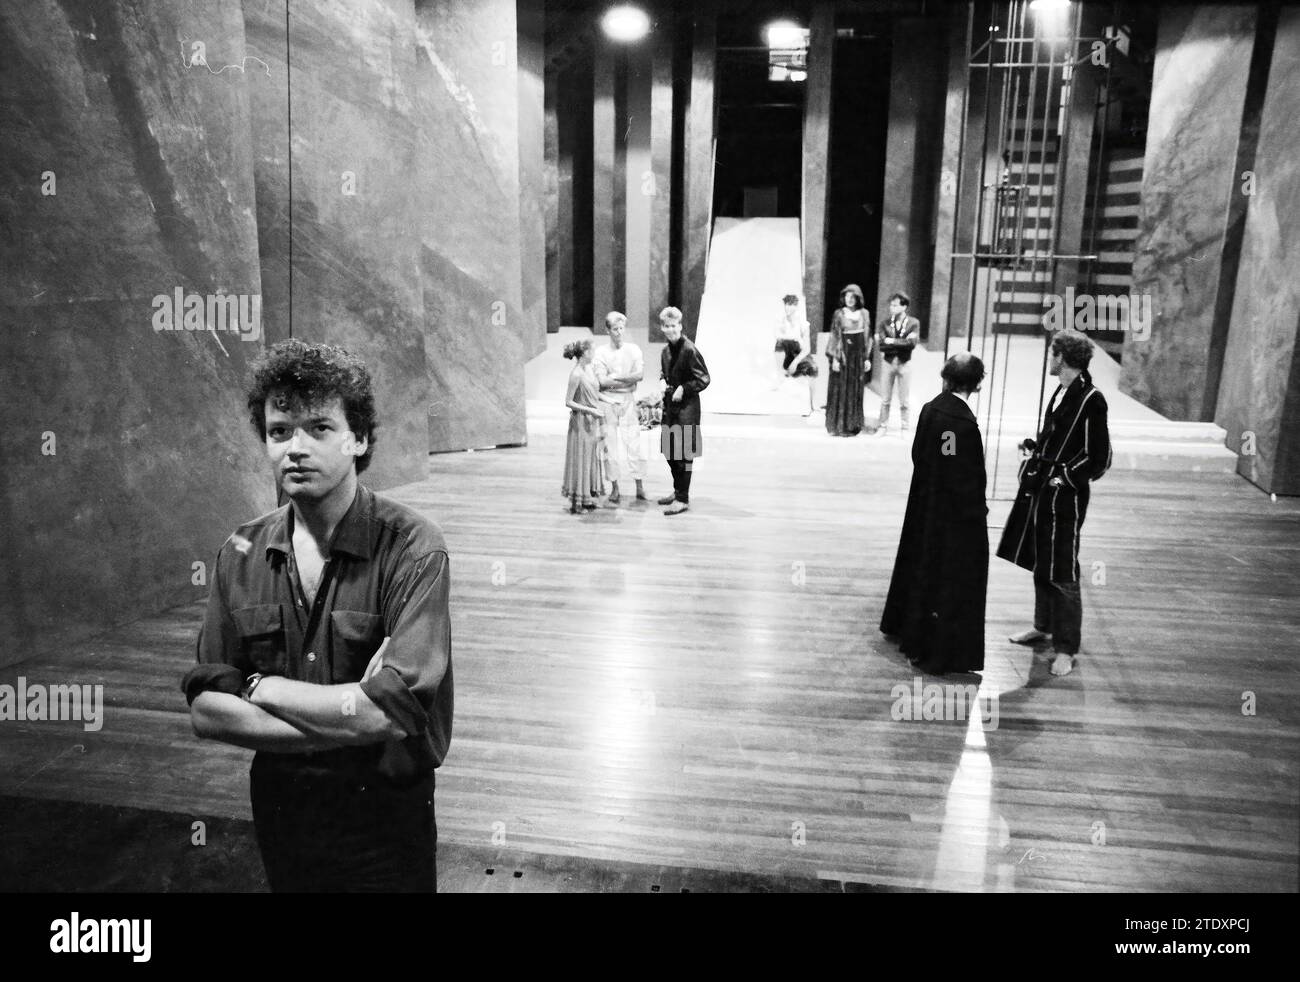 Director Martin Oosthoek Toneelschuur, Theater, 26-08-1984, Whizgle News from the Past, Tailored for the Future. Explore historical narratives, Dutch The Netherlands agency image with a modern perspective, bridging the gap between yesterday's events and tomorrow's insights. A timeless journey shaping the stories that shape our future. Stock Photo